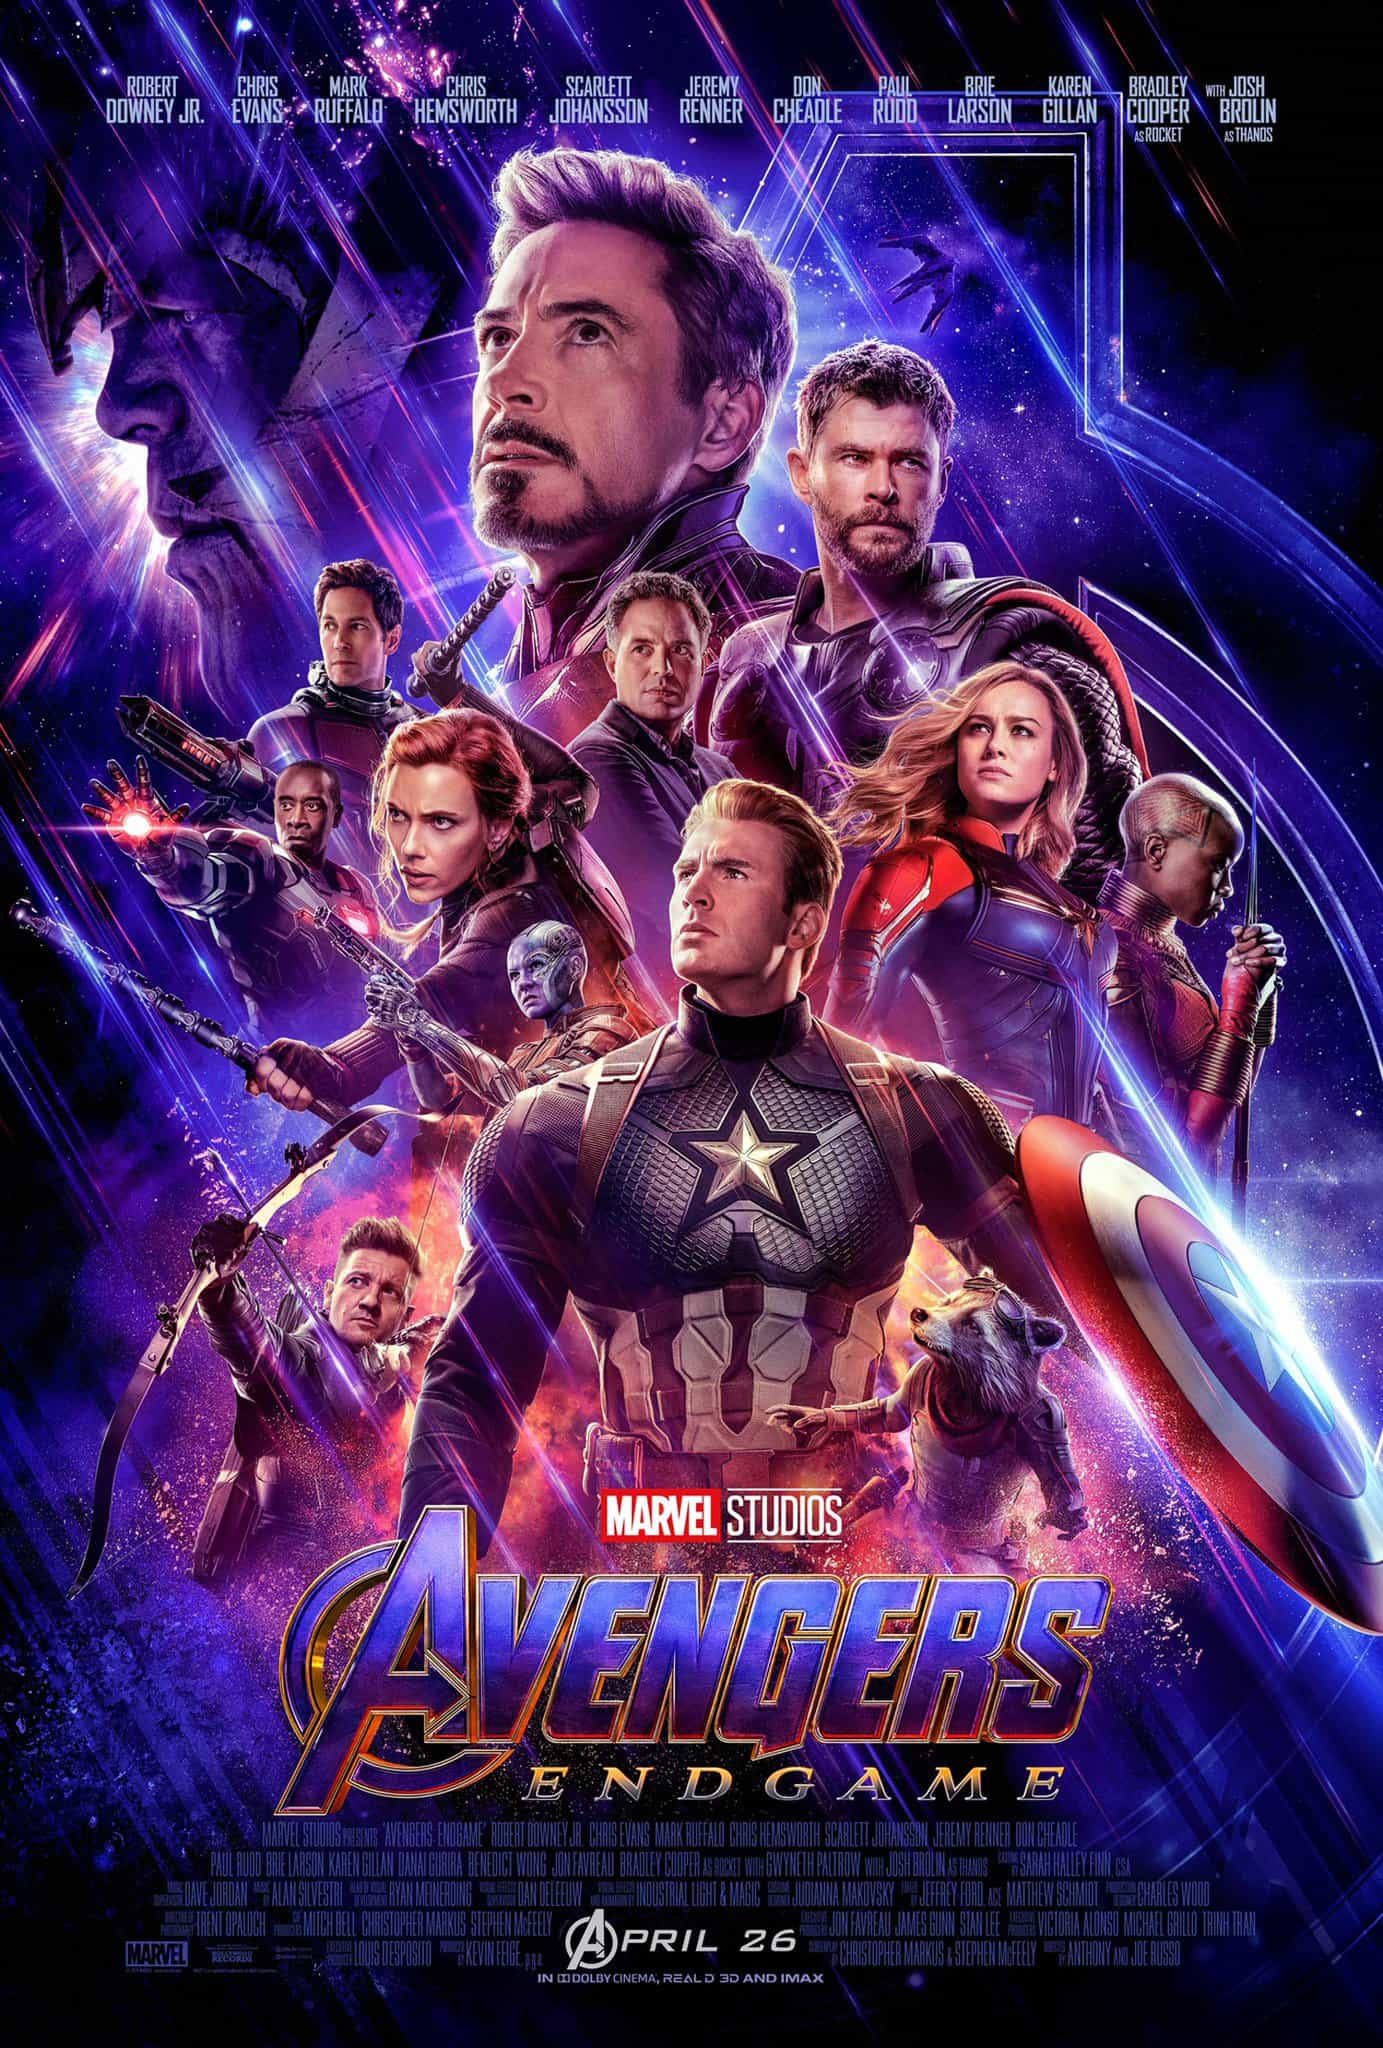 Avengers: Endgame become the highest grossing movie of all time taking over from Avatar